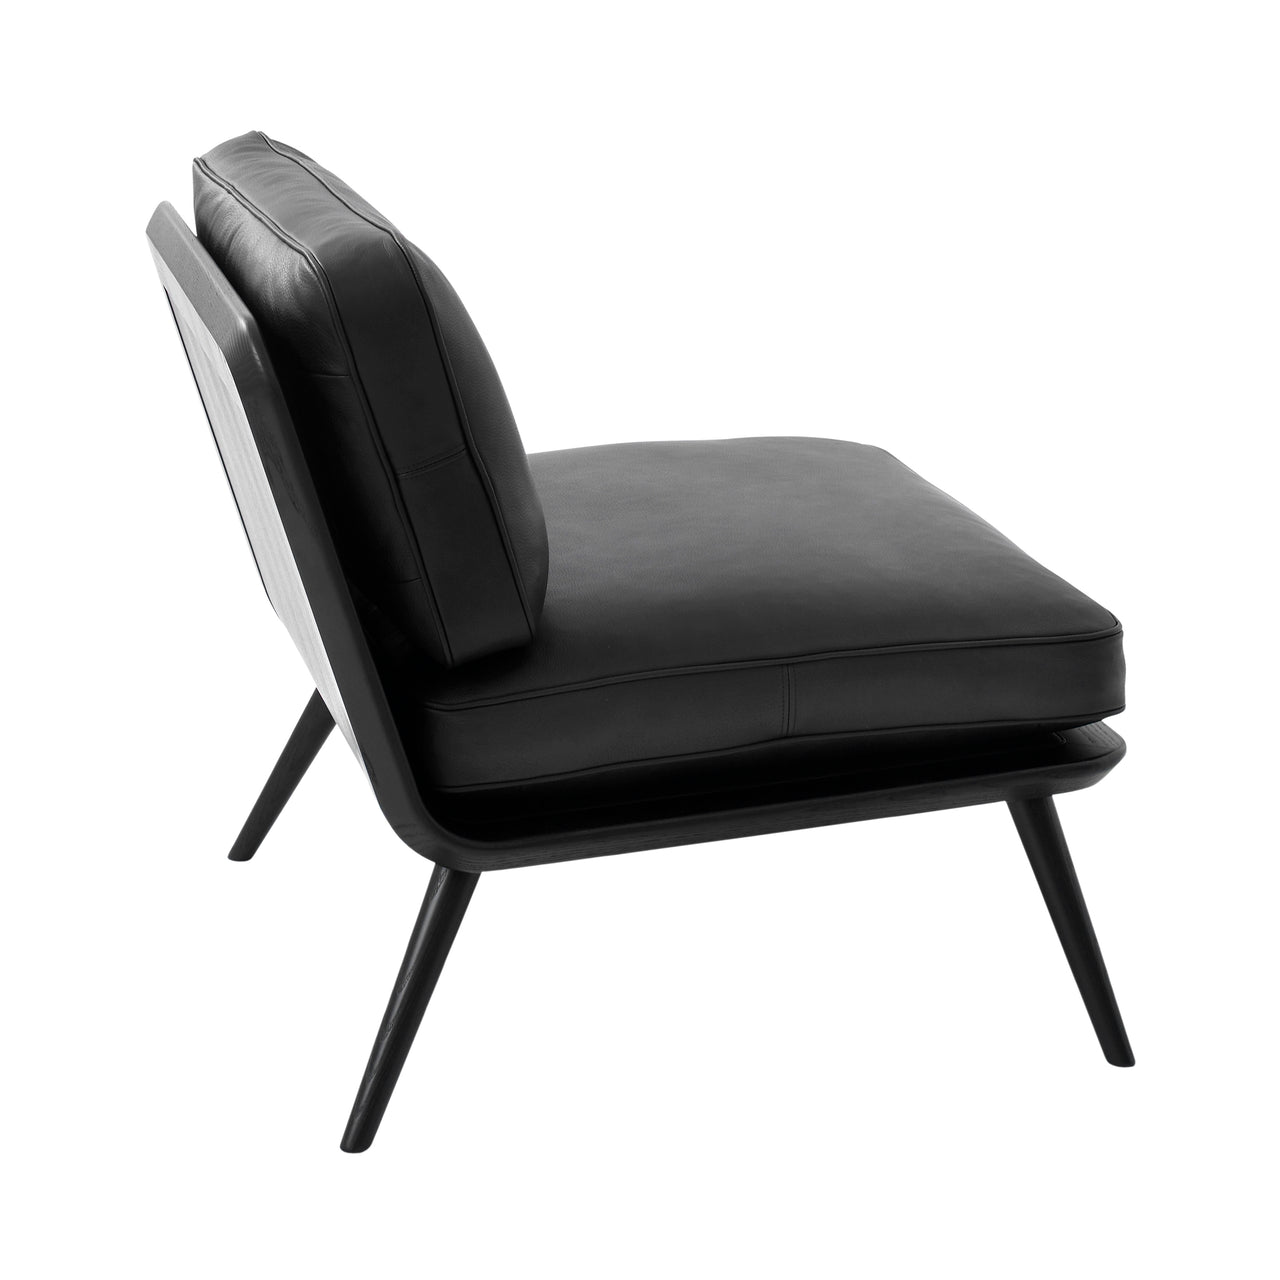 Spine Lounge Suite Chair: Black Lacquered Ash